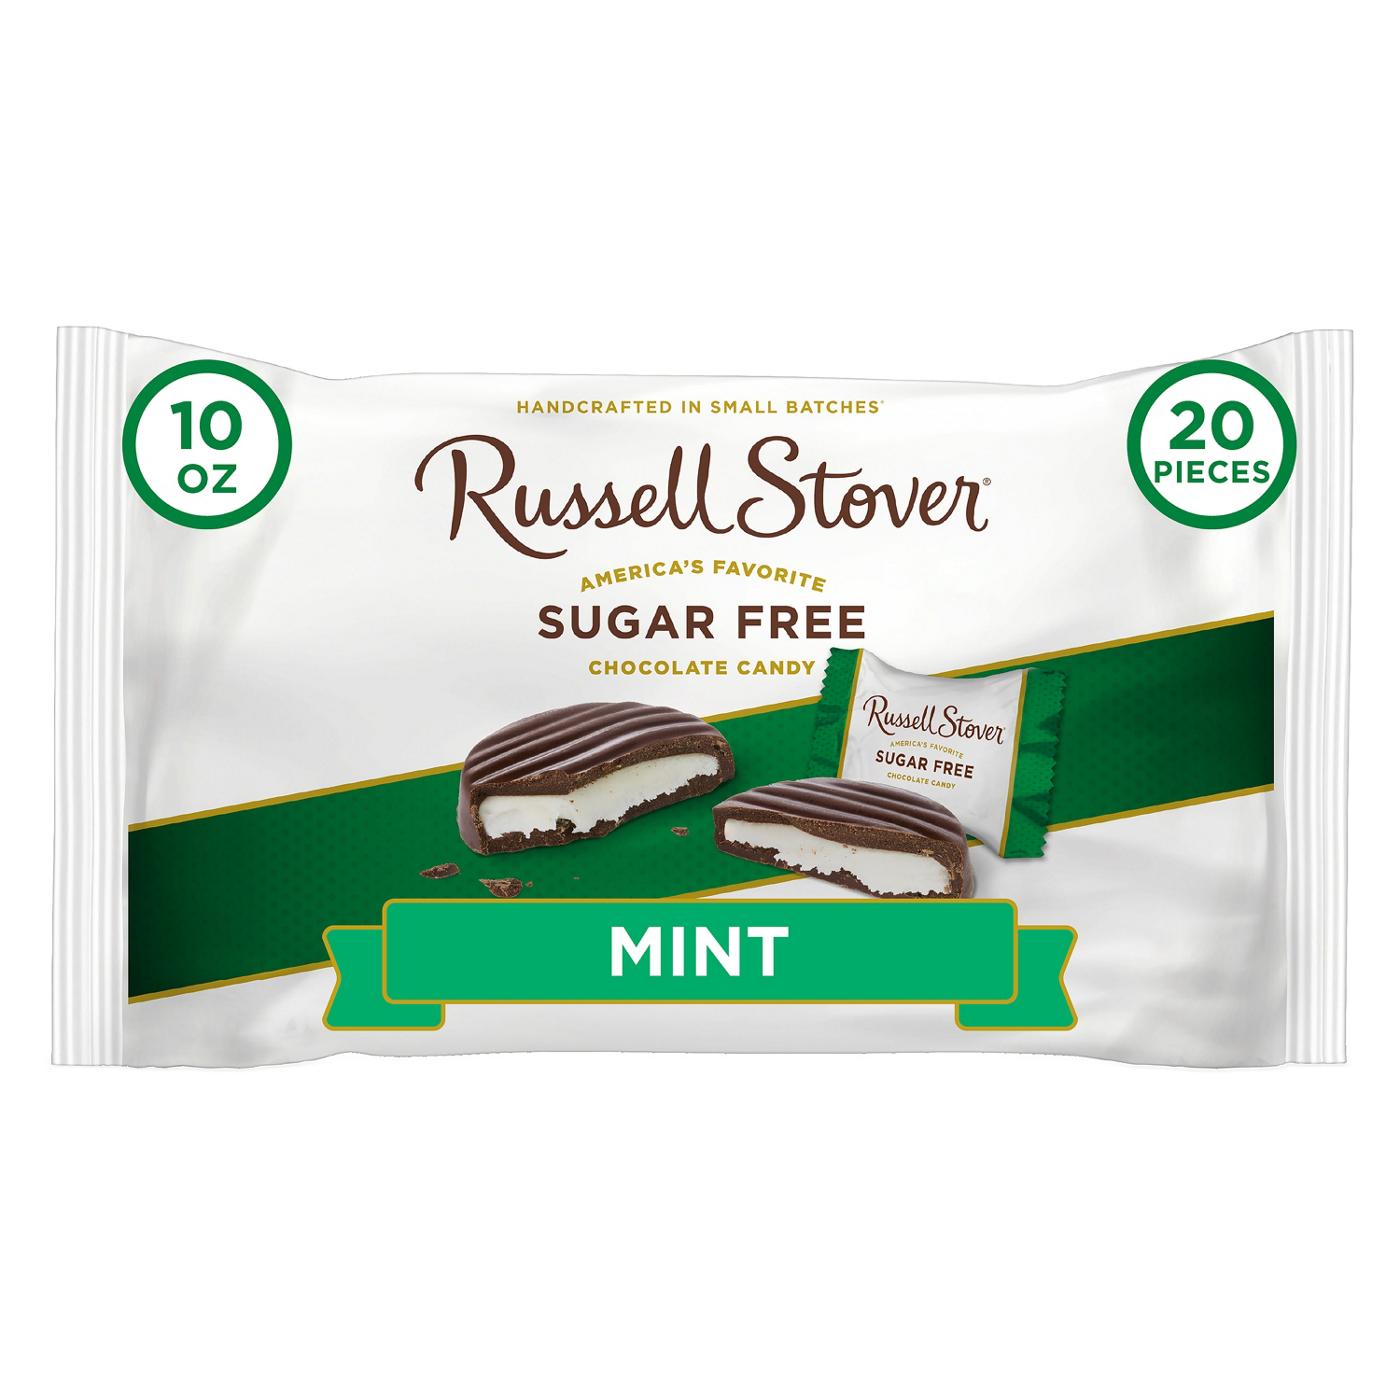 Russell Stover Sugar Free Mint Patties; image 2 of 5